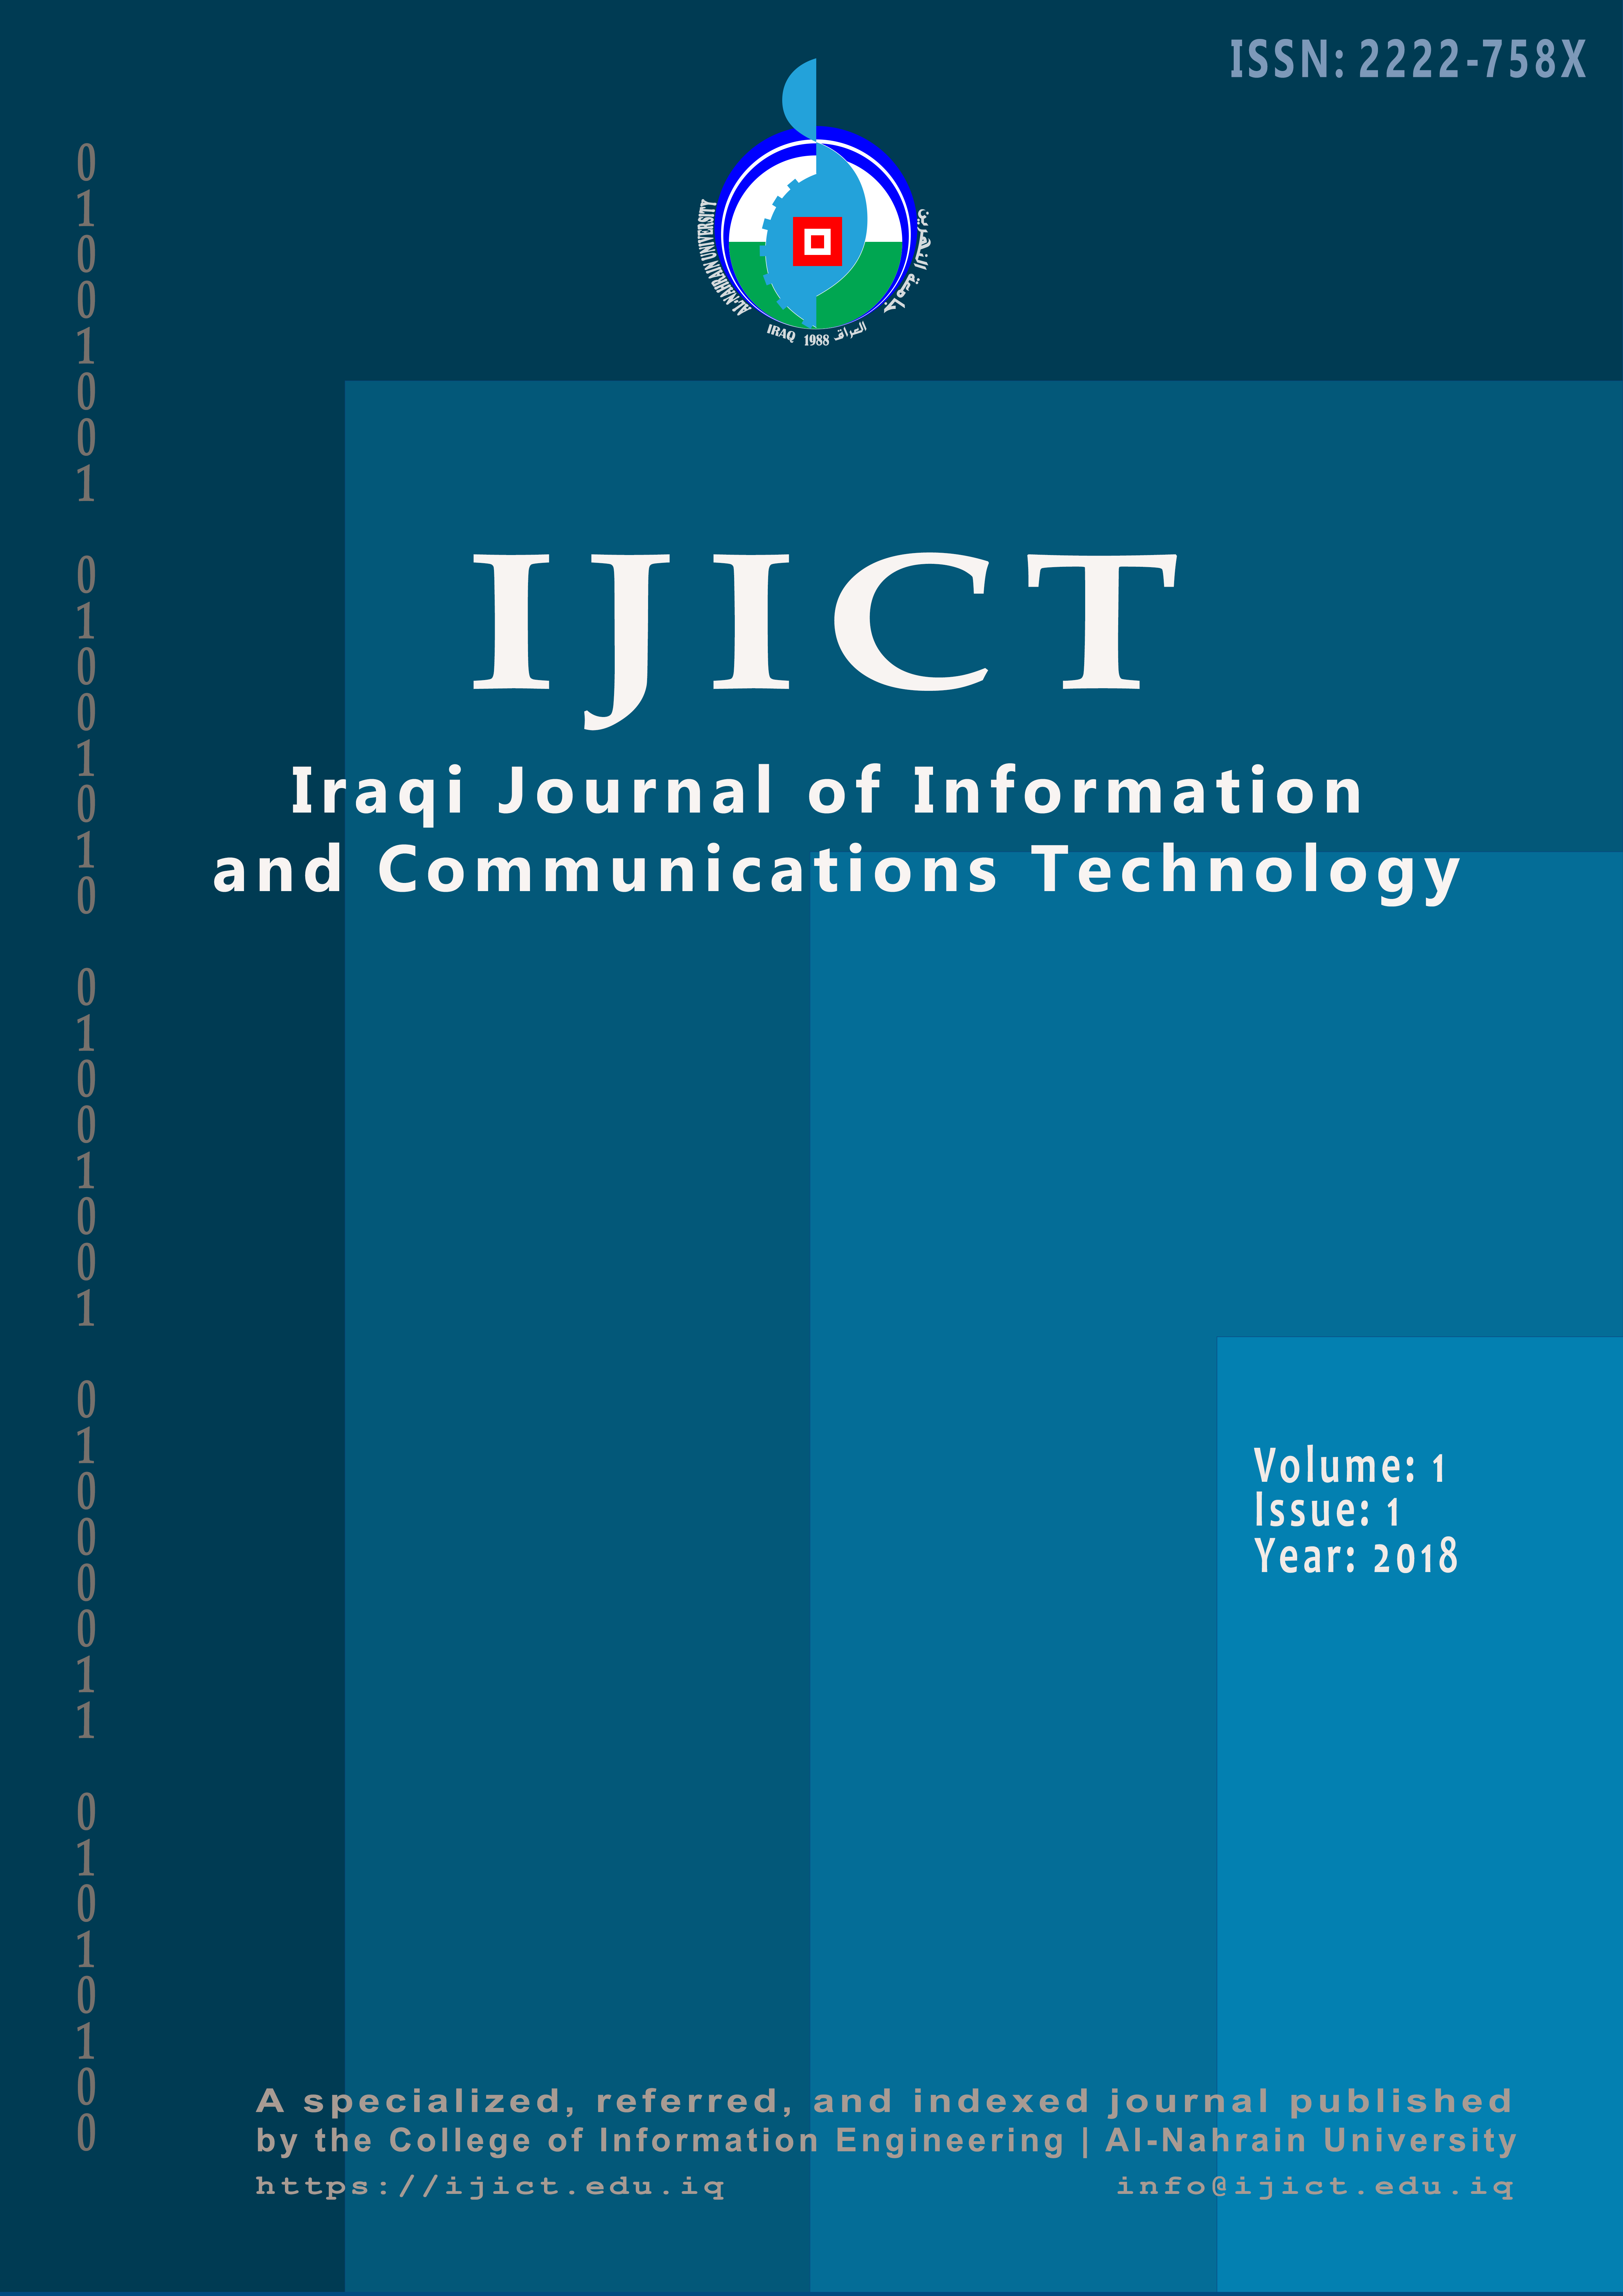 Vol. 1, Issue 1, 2018, Iraqi Journal of Information and Communications Technology